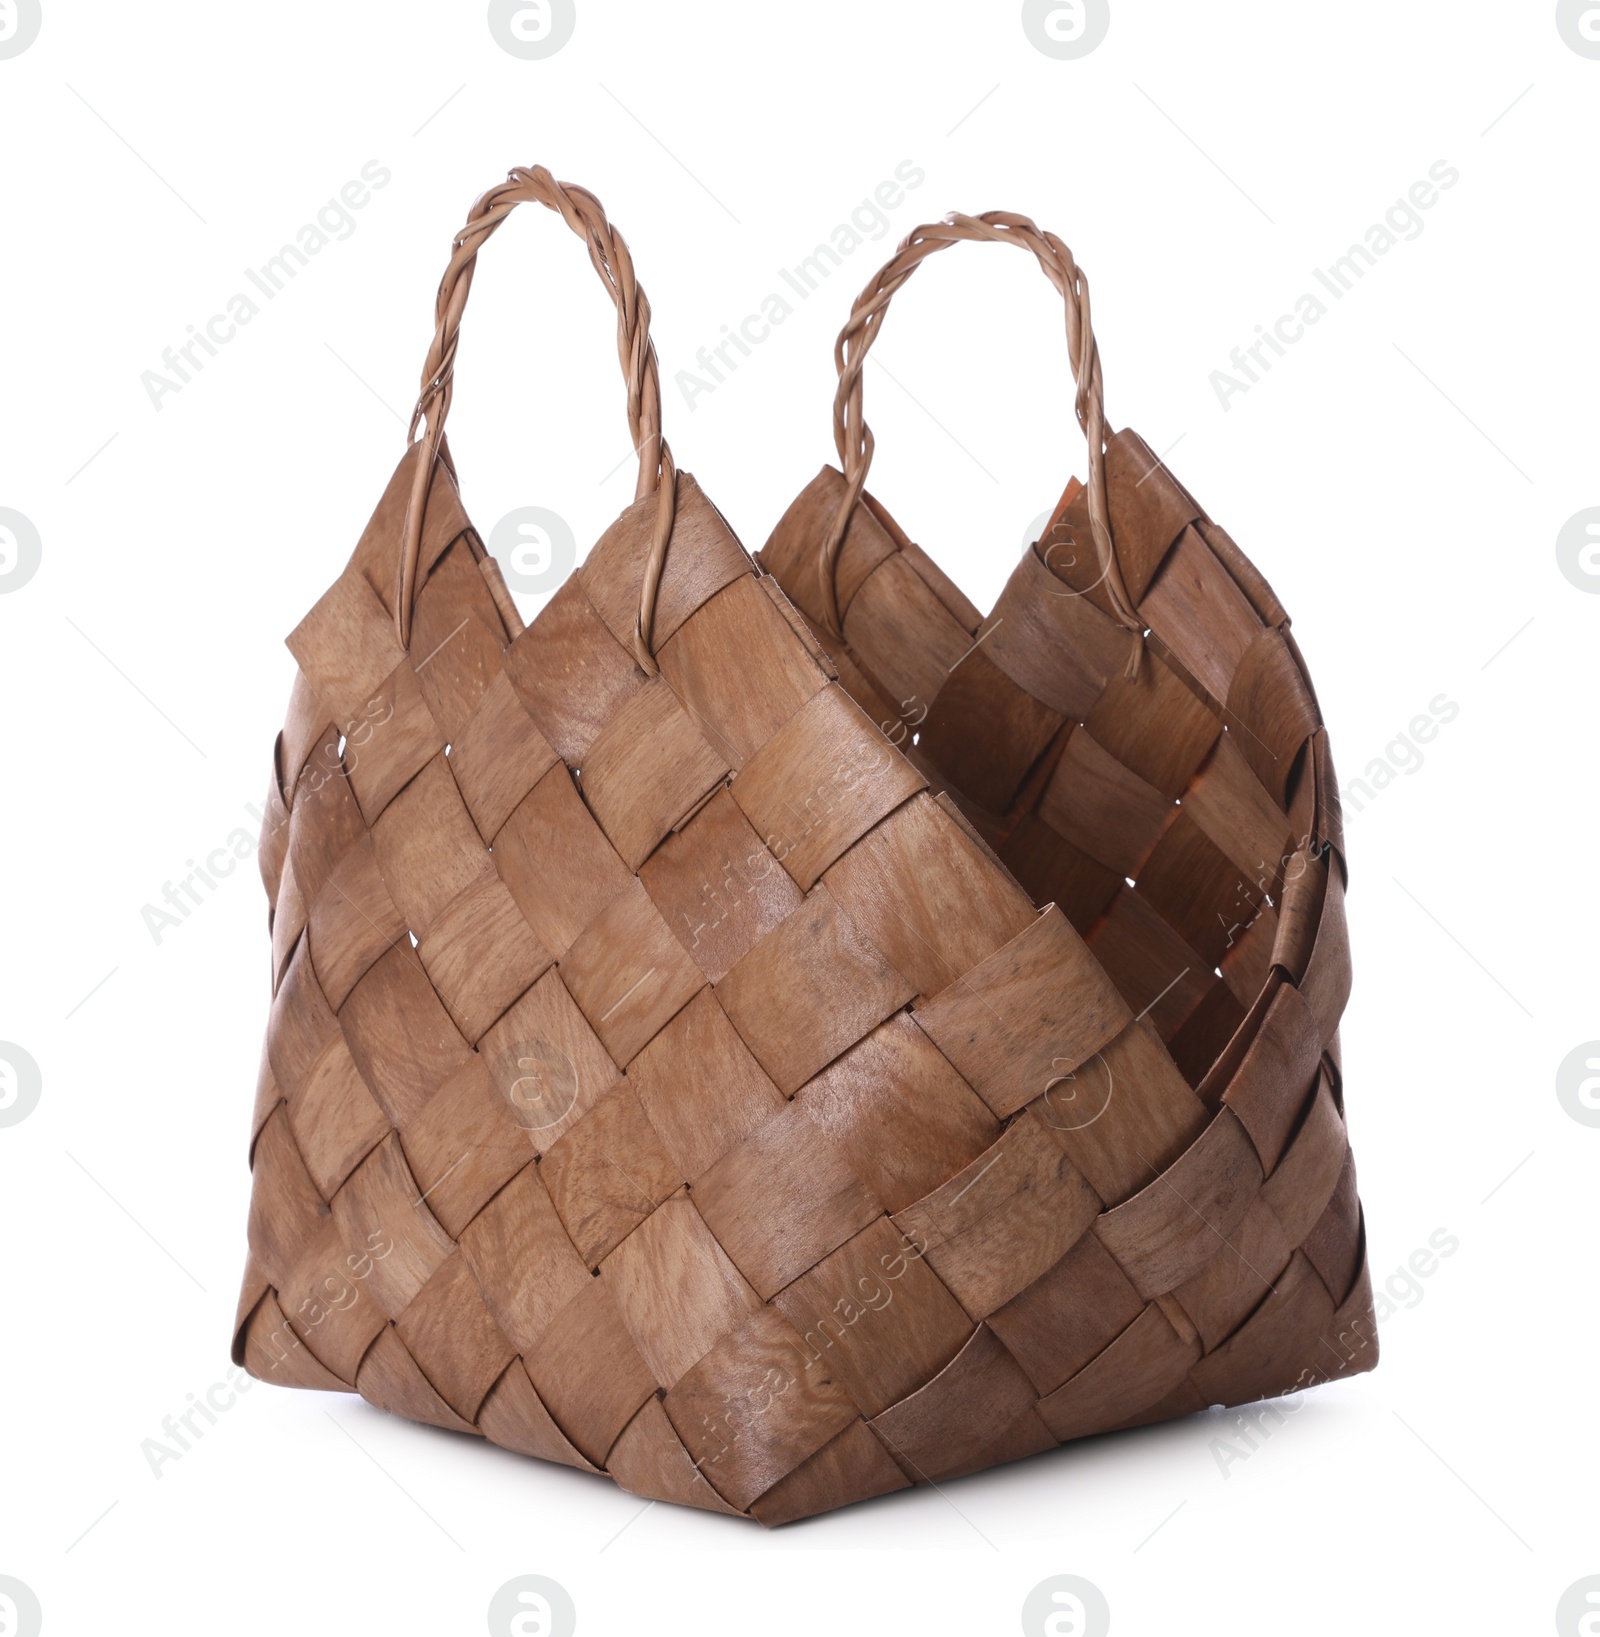 Photo of Stylish brown wicker basket isolated on white